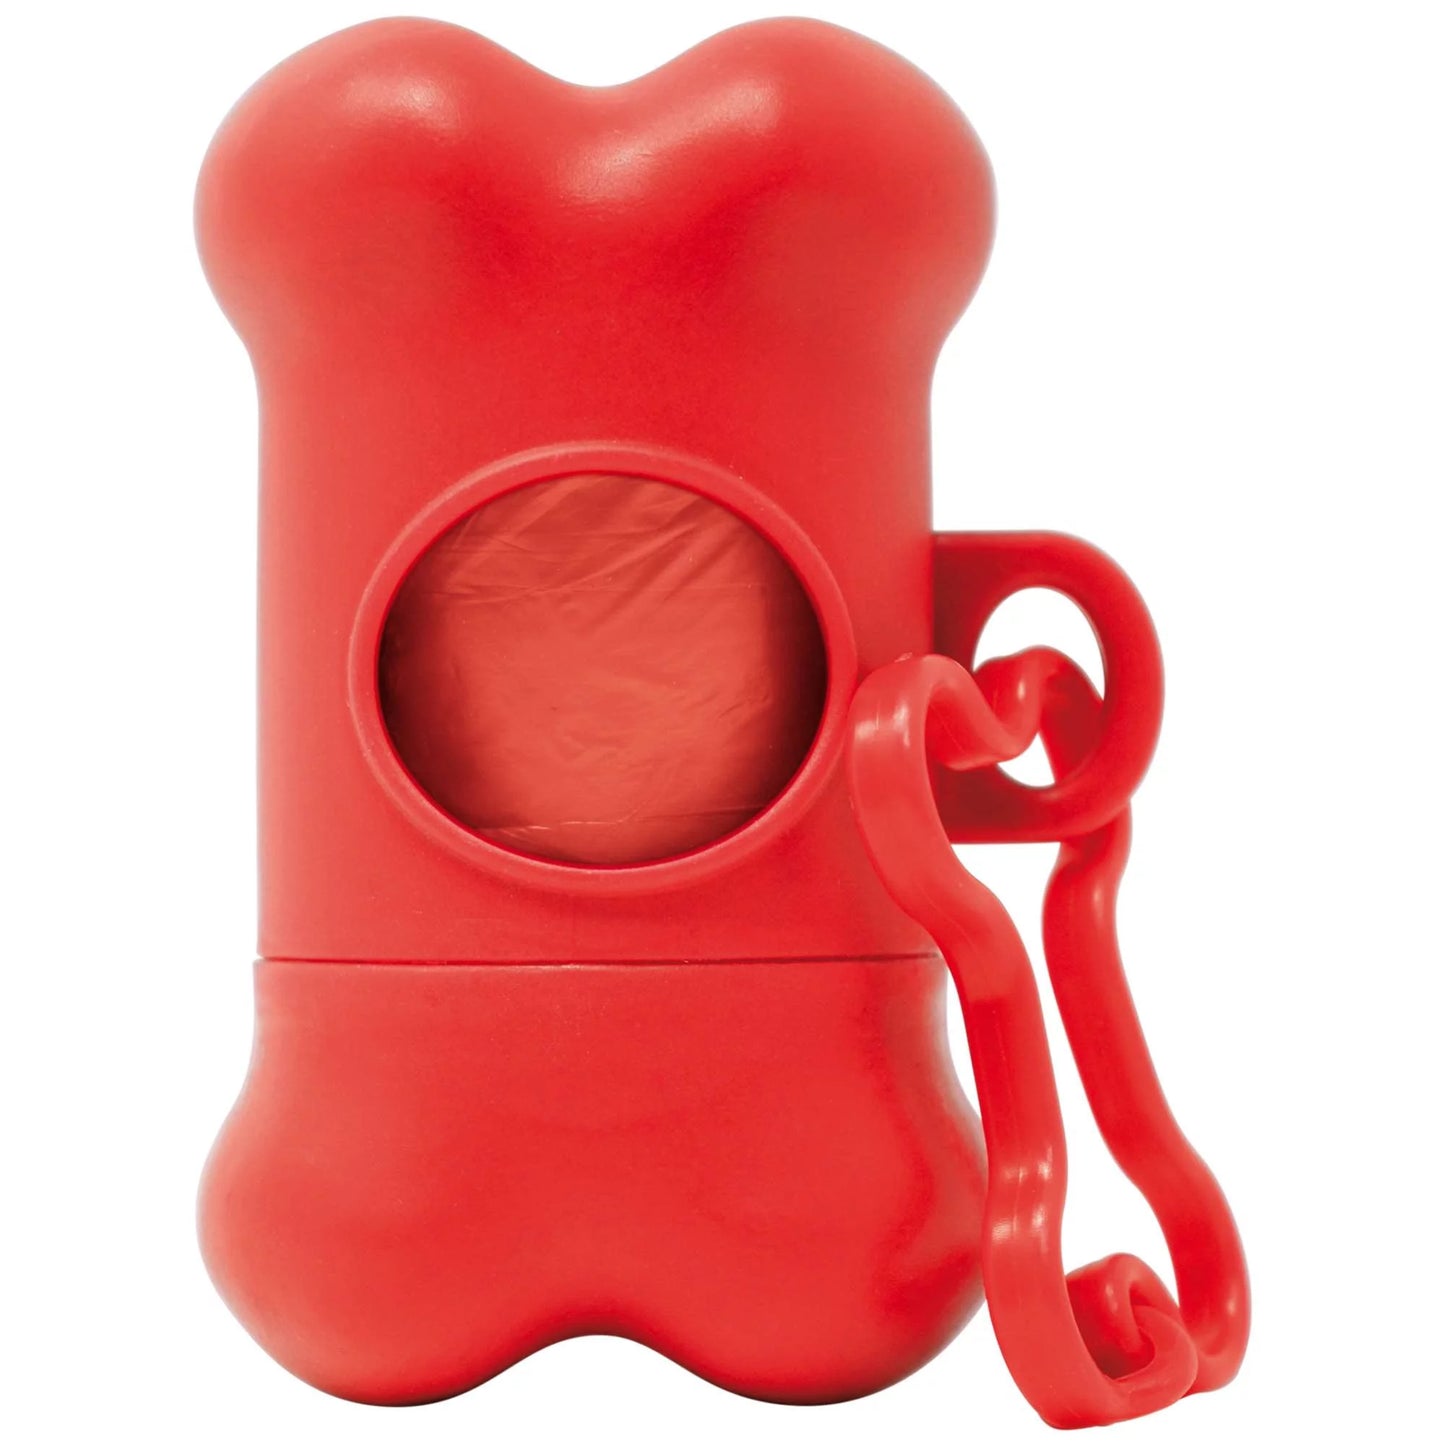 RED HYGIENIC BAG HOLDER WITH ROLL OF 15 BAGS 